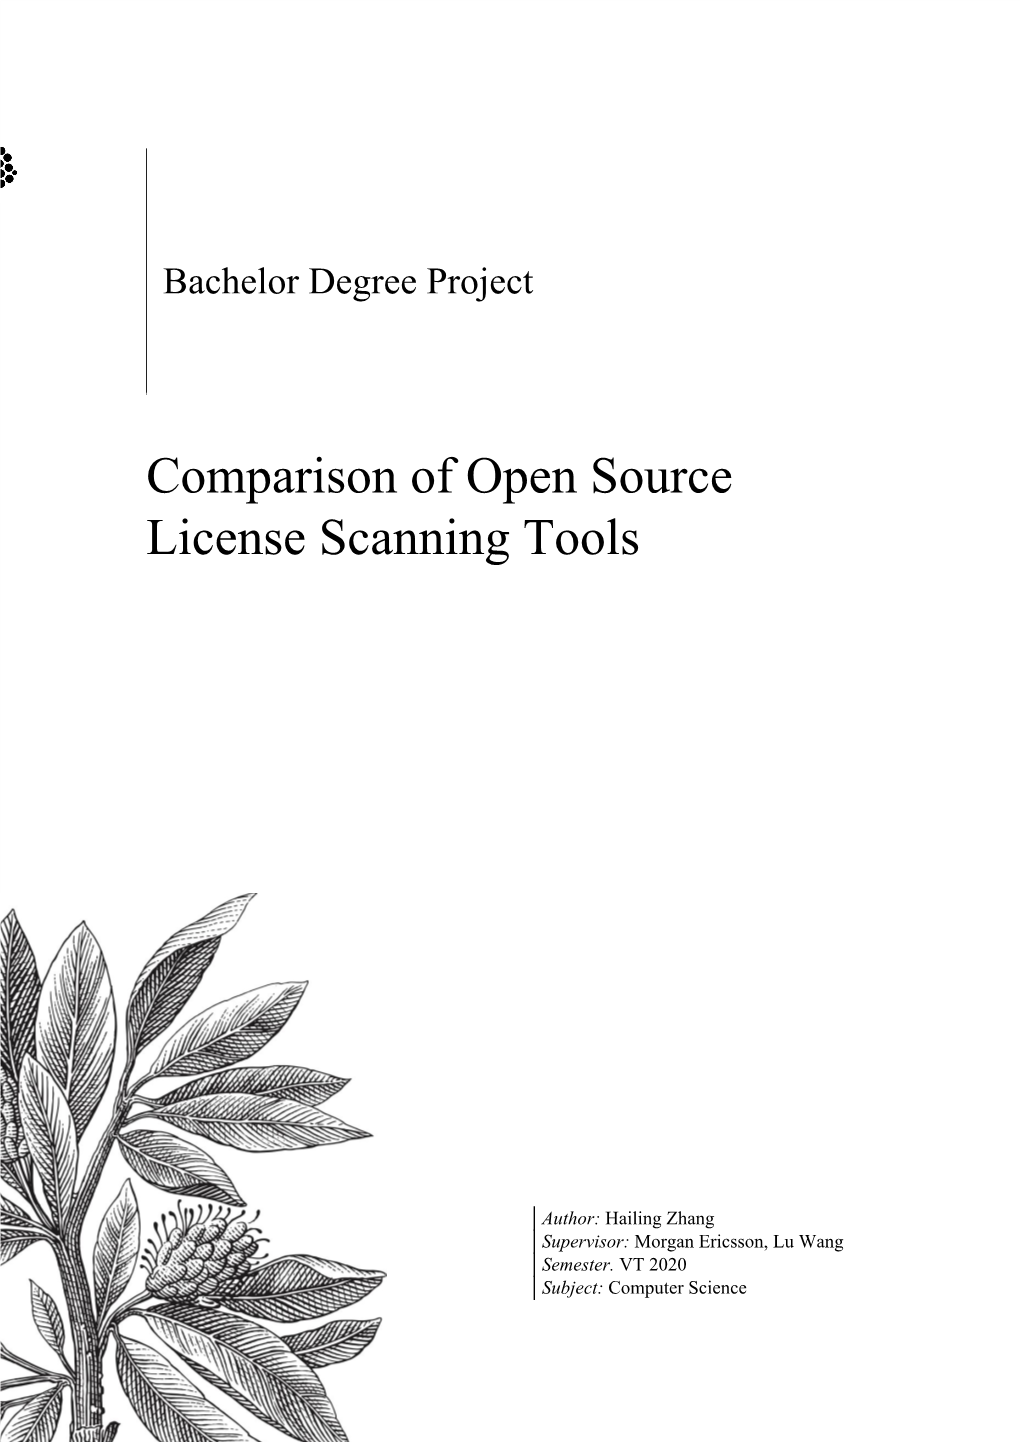 Comparison of Open Source License Scanning Tools